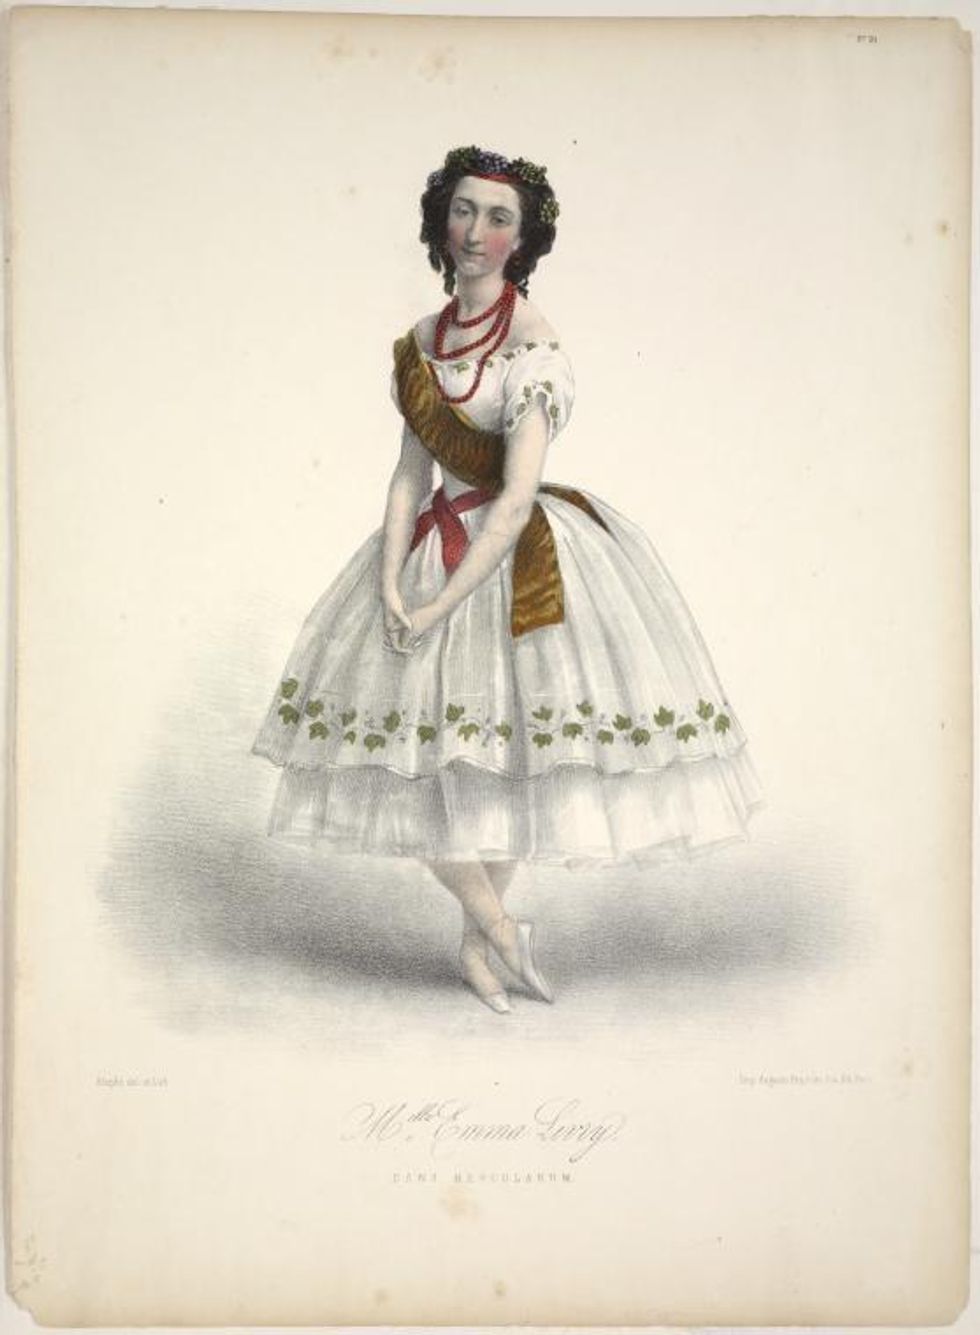 In this antique drawing, a ballerina stands with her arms low with hands clasped gently and her right foot crossed over her left. She wears a white, off-the-shoulder Romantic tutu with a green leaf design trimming the bottom, a gold sash and a red beaded necklace.